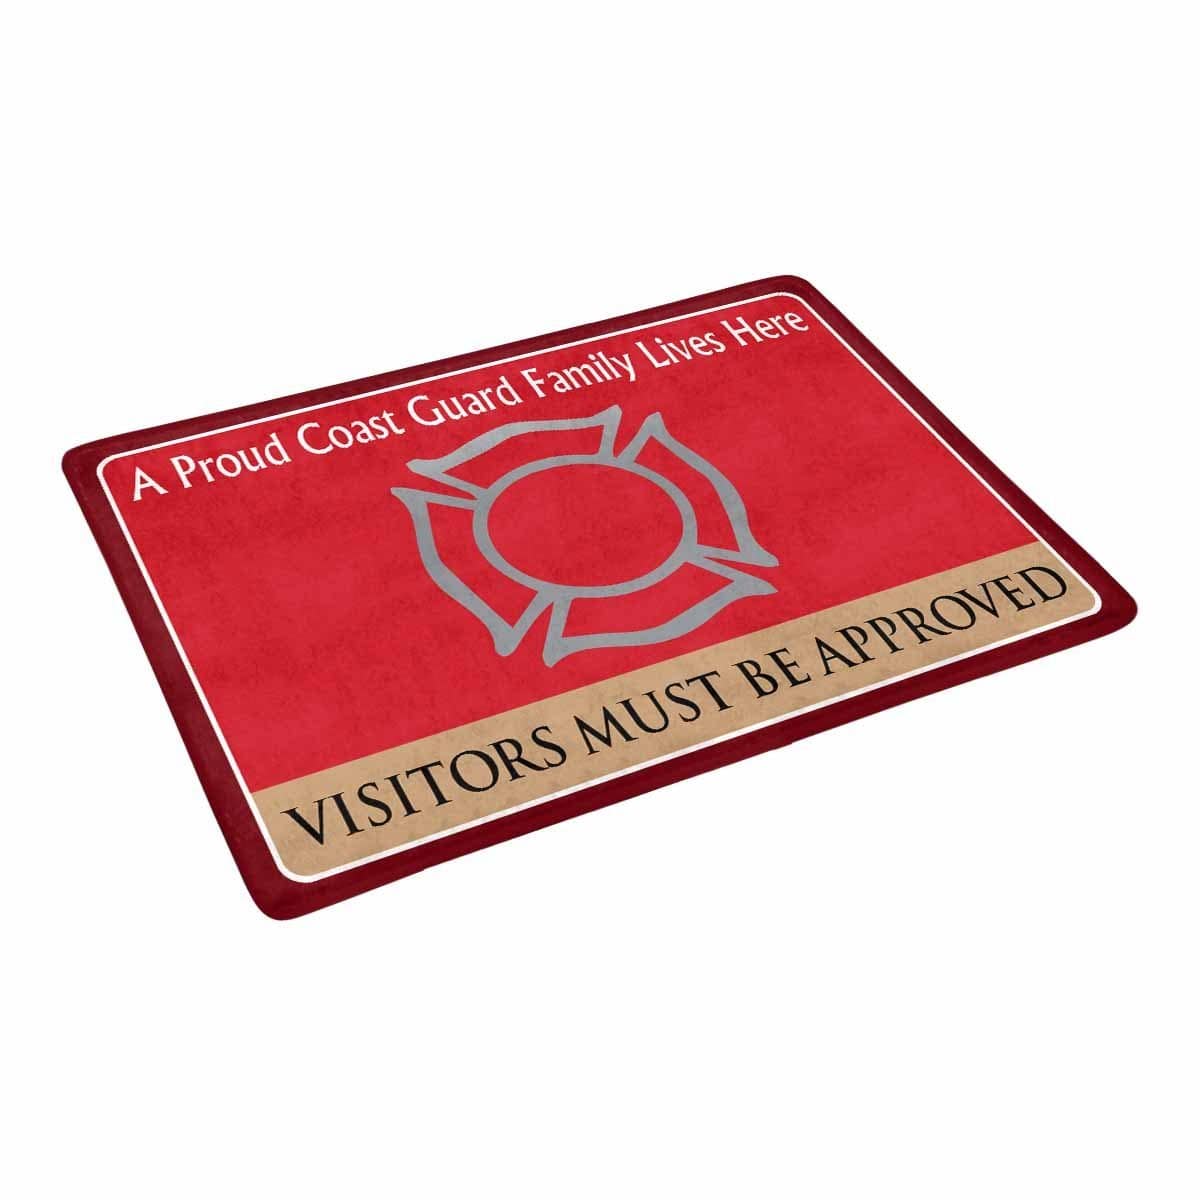 US Coast Guard Fire and Safety Specialist FF Logo Family Doormat - Visitors must be approved (23.6 inches x 15.7 inches)-Doormat-USCG-Rate-Veterans Nation